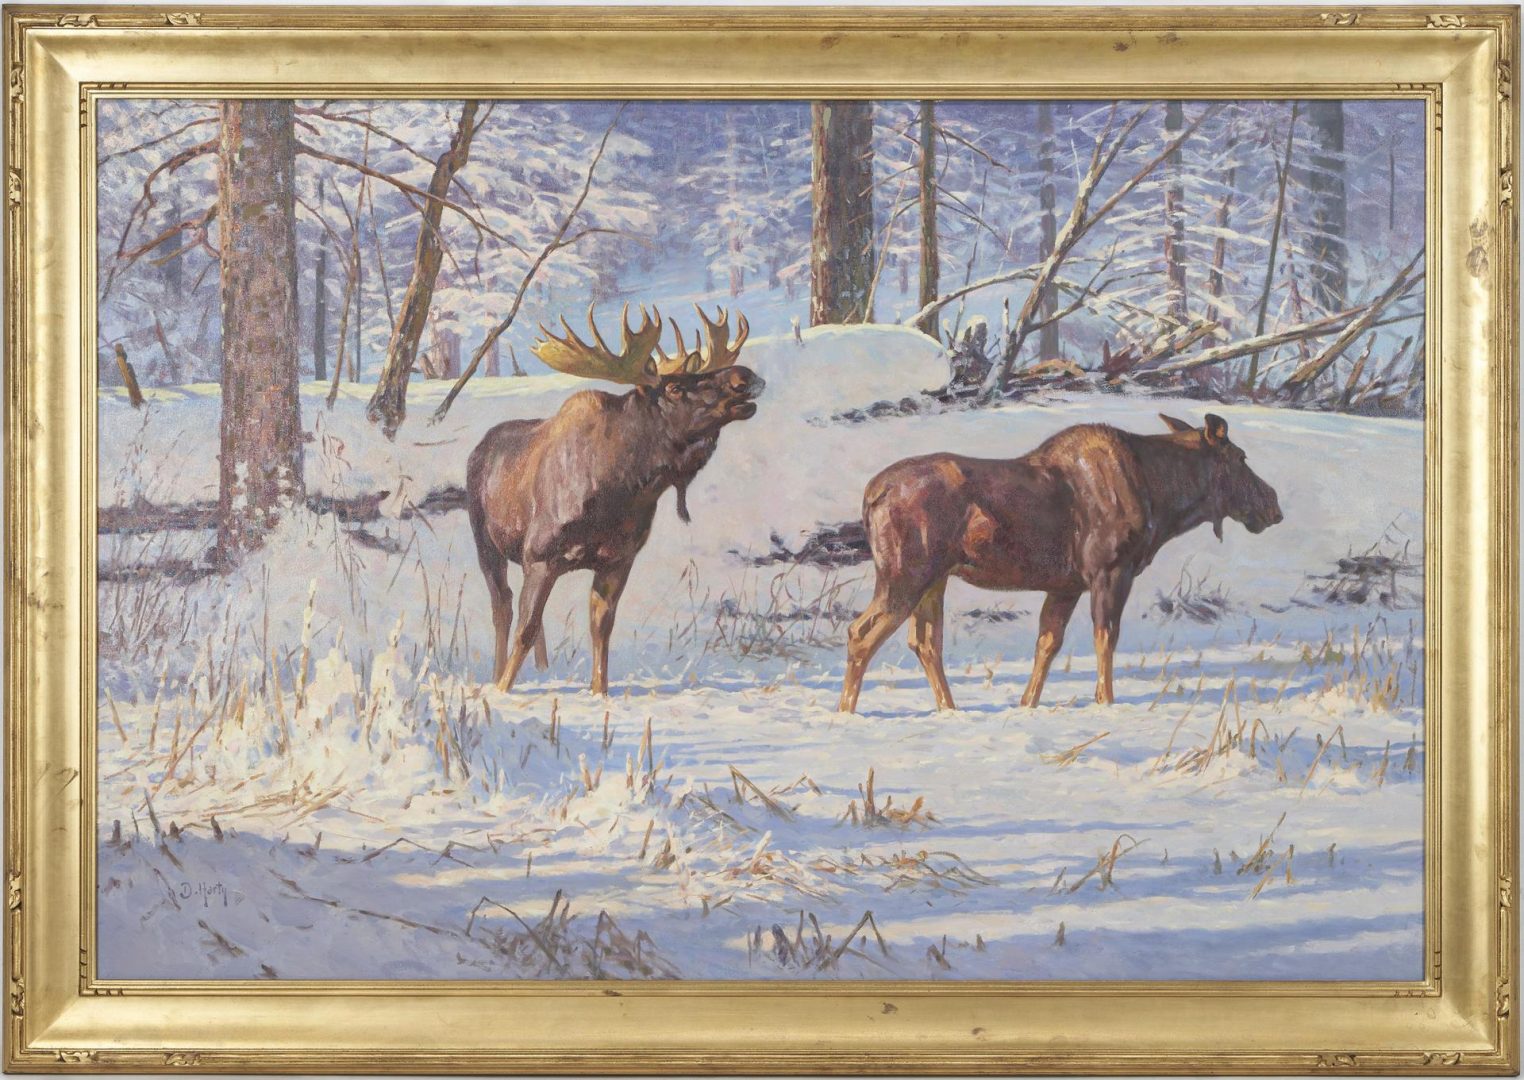 Lot 604: Large Dwayne Harty Oil on Canvas Wildlife Painting